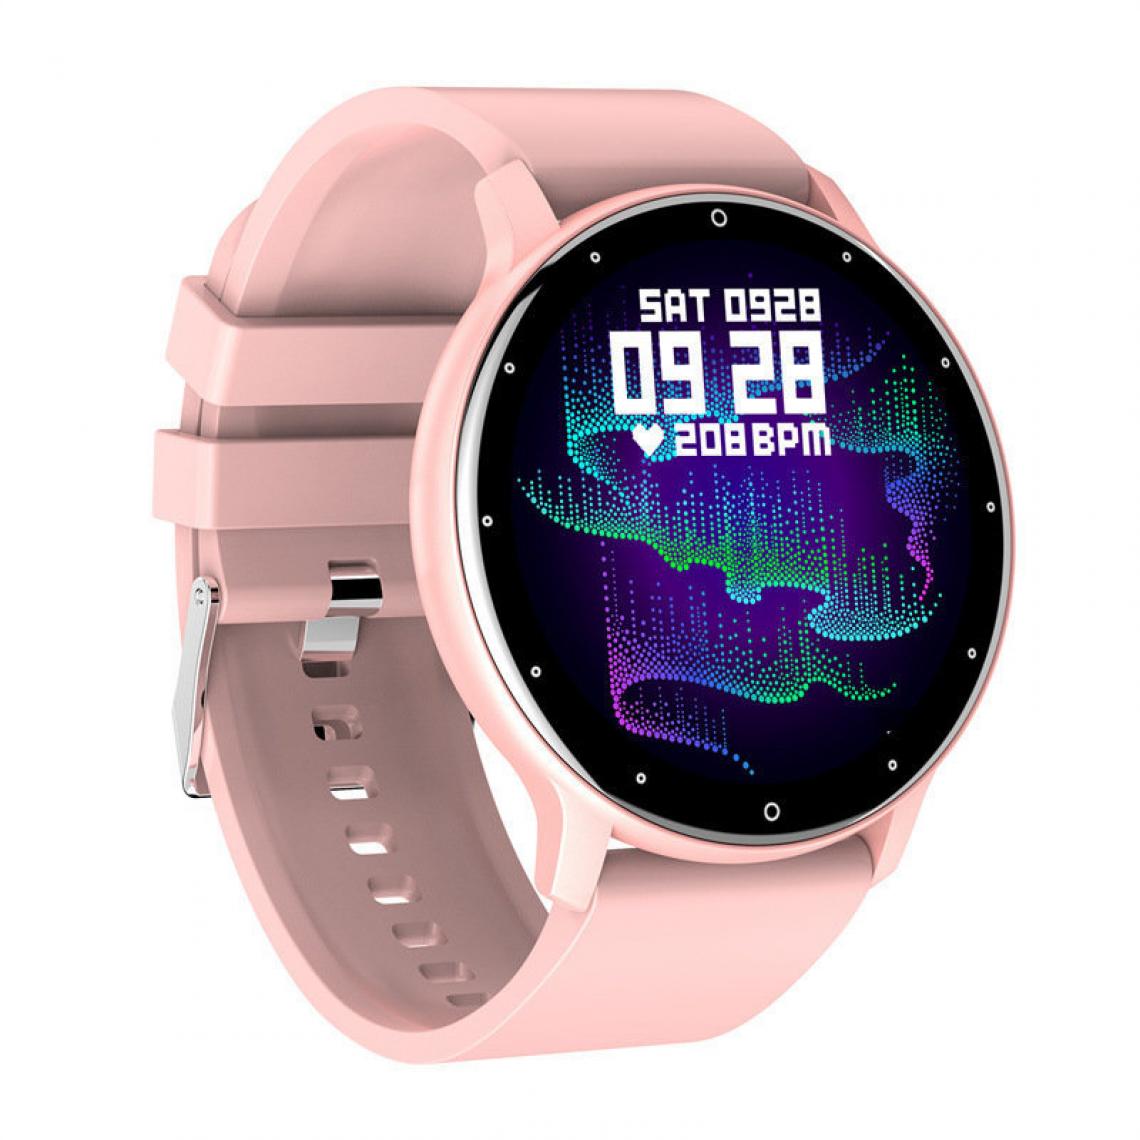 Chronotech Montres - Smart Watches Heart Rate Monitor Watches Waterproof Fitness Tracker Wristband Monitor Rest and Set Sleep Goals(Pink) - Montre connectée